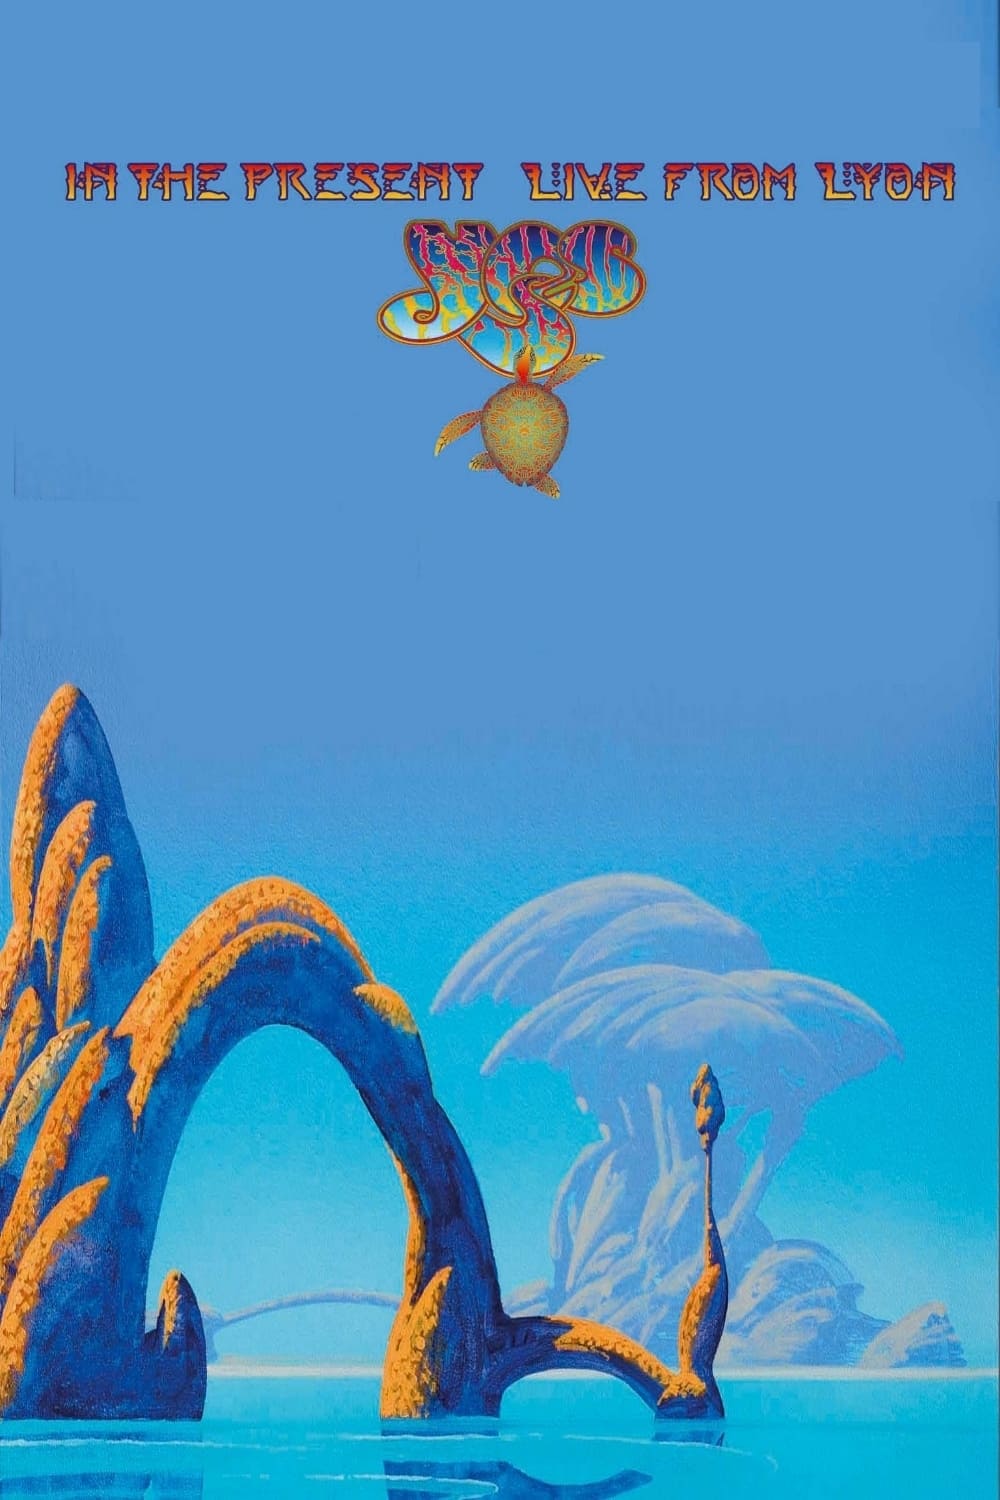 Yes - In The Present Live From Lyon